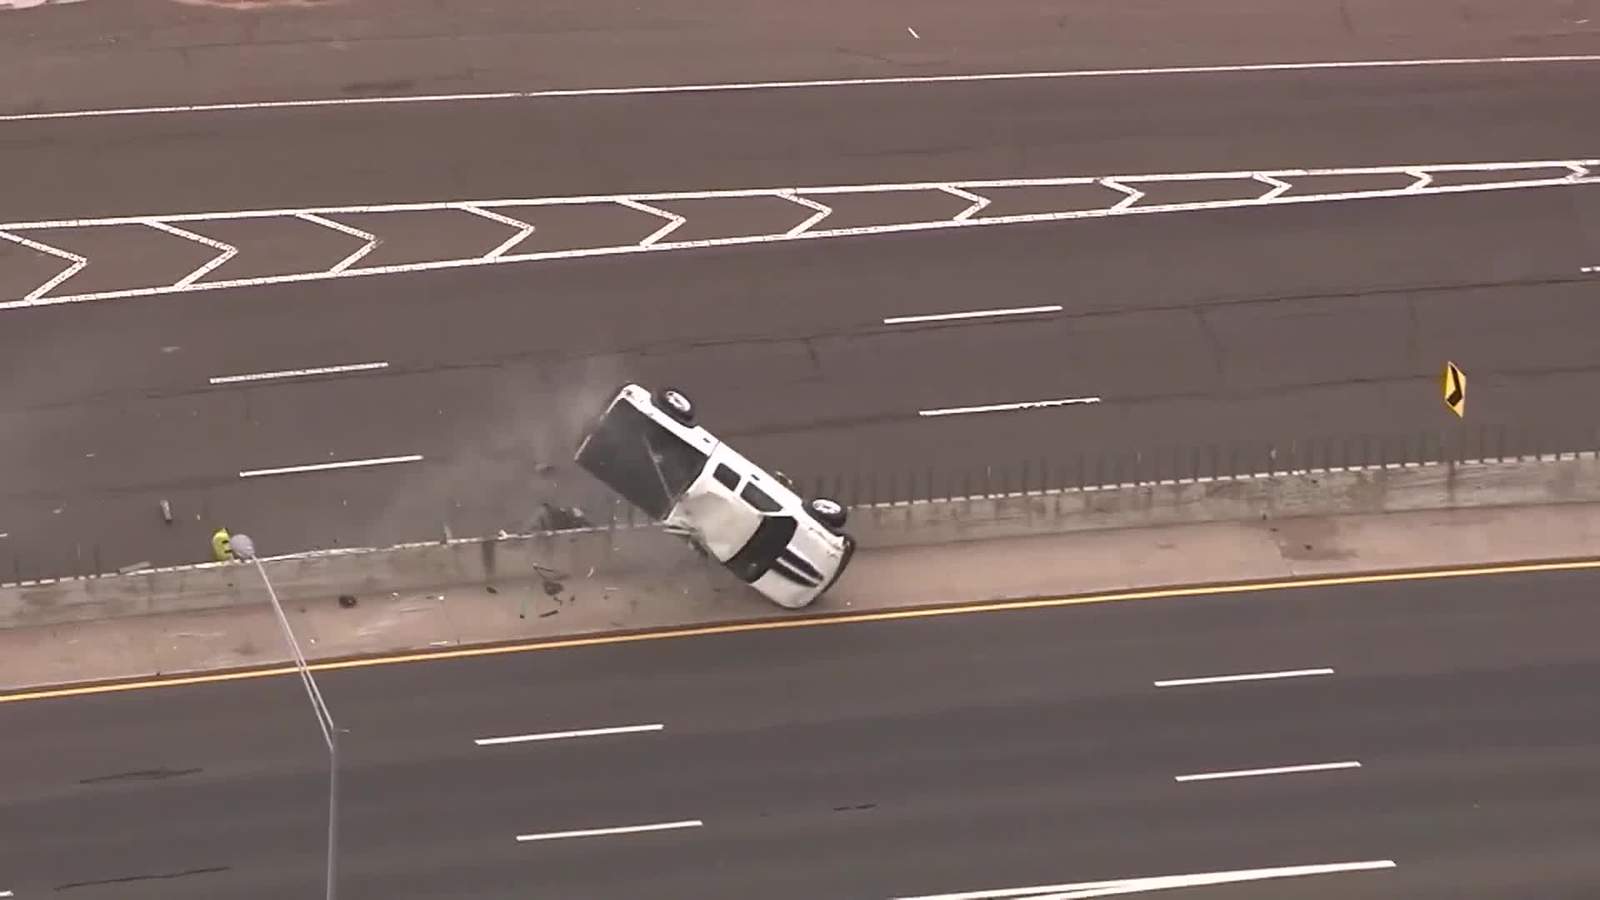 Truck rolls over during high speed police chase, keeps driving